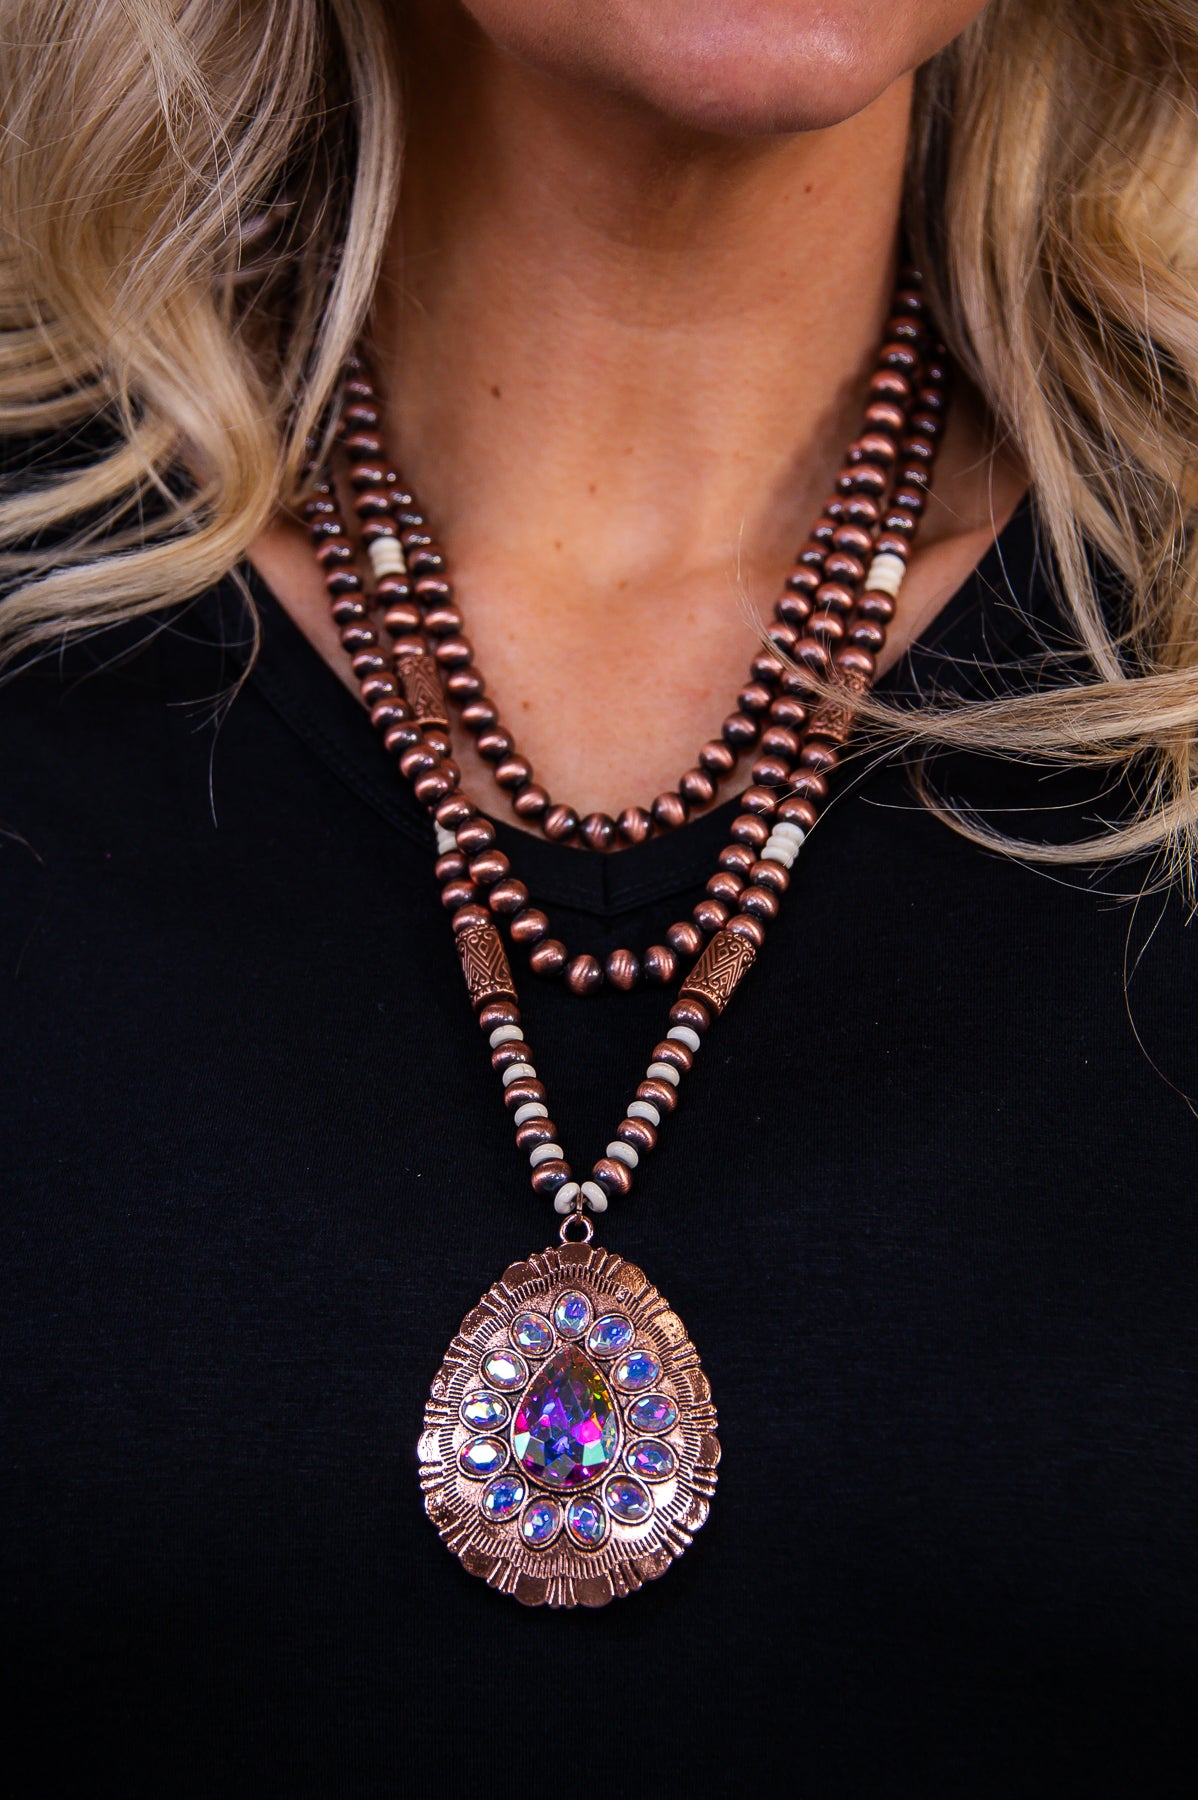 Copper Beaded Bling Layered Pendant Necklace - NEK4343CP